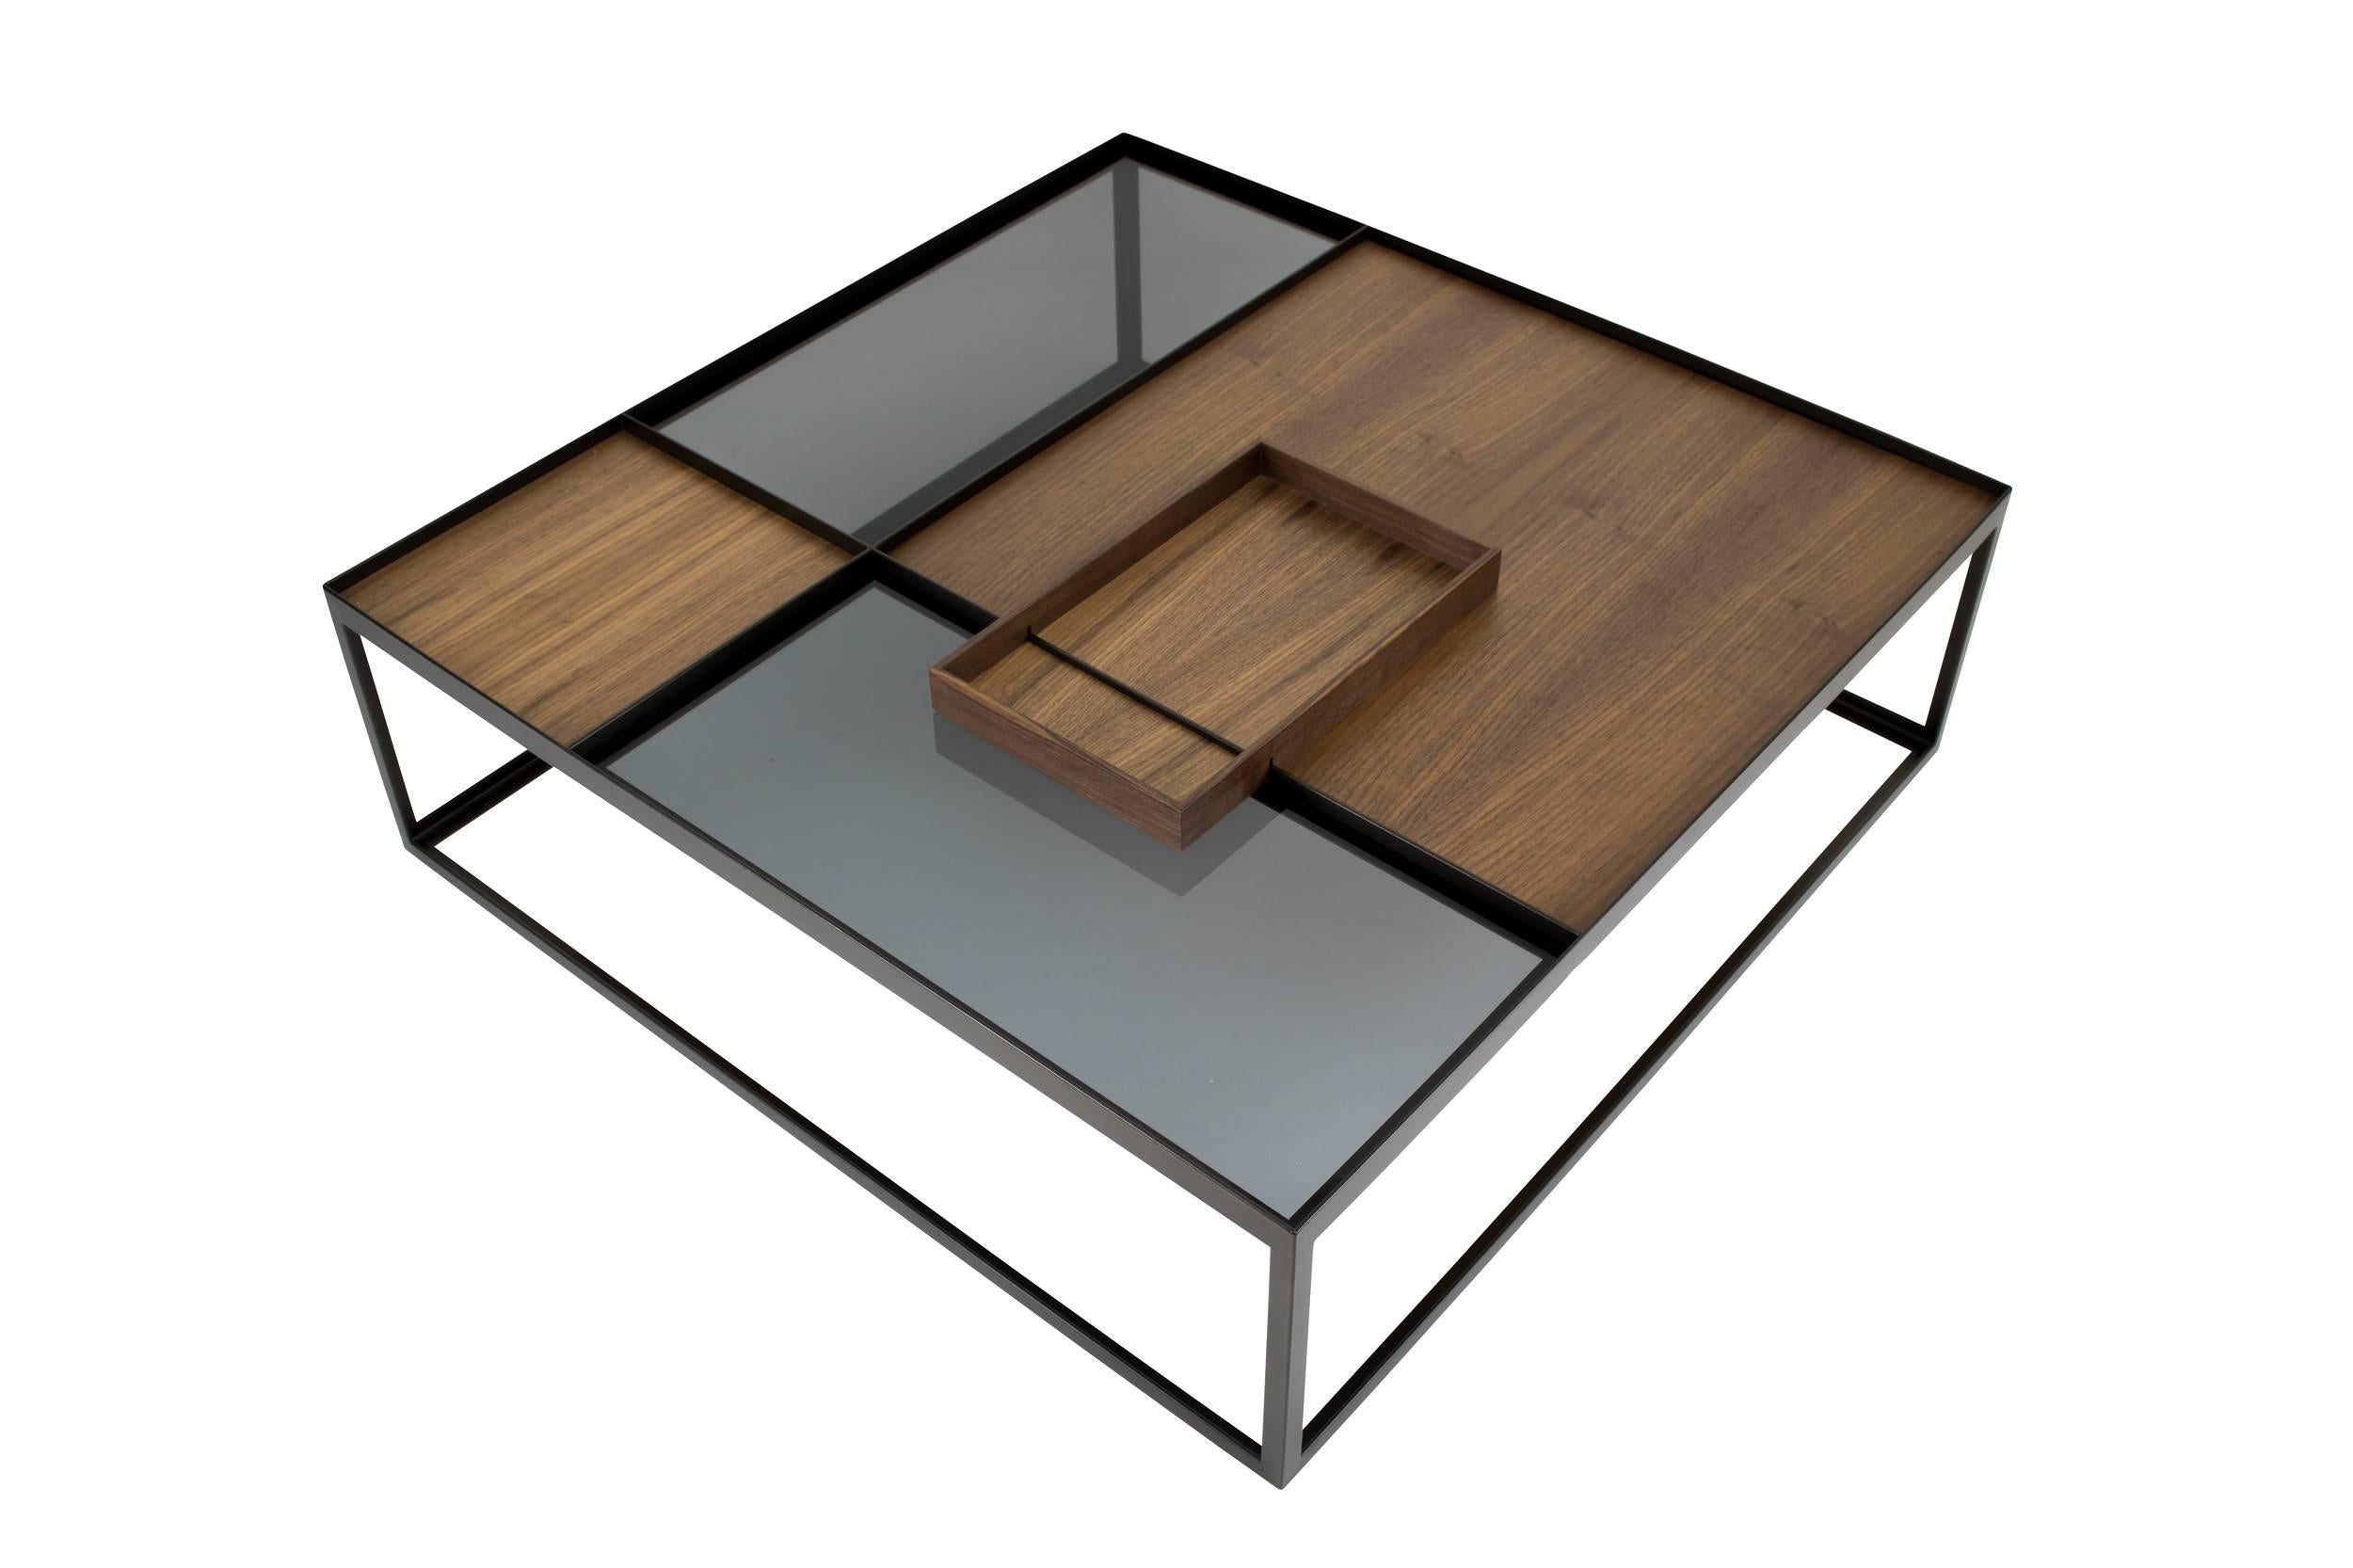 The Q4 coffee table is a reminiscence to the conceptualism De Stijl and equally inspired by minimalistic architecture.
Different valuable materials combined with a filigree steel frame shaping the elegant minimalistic appearance.
The removable and